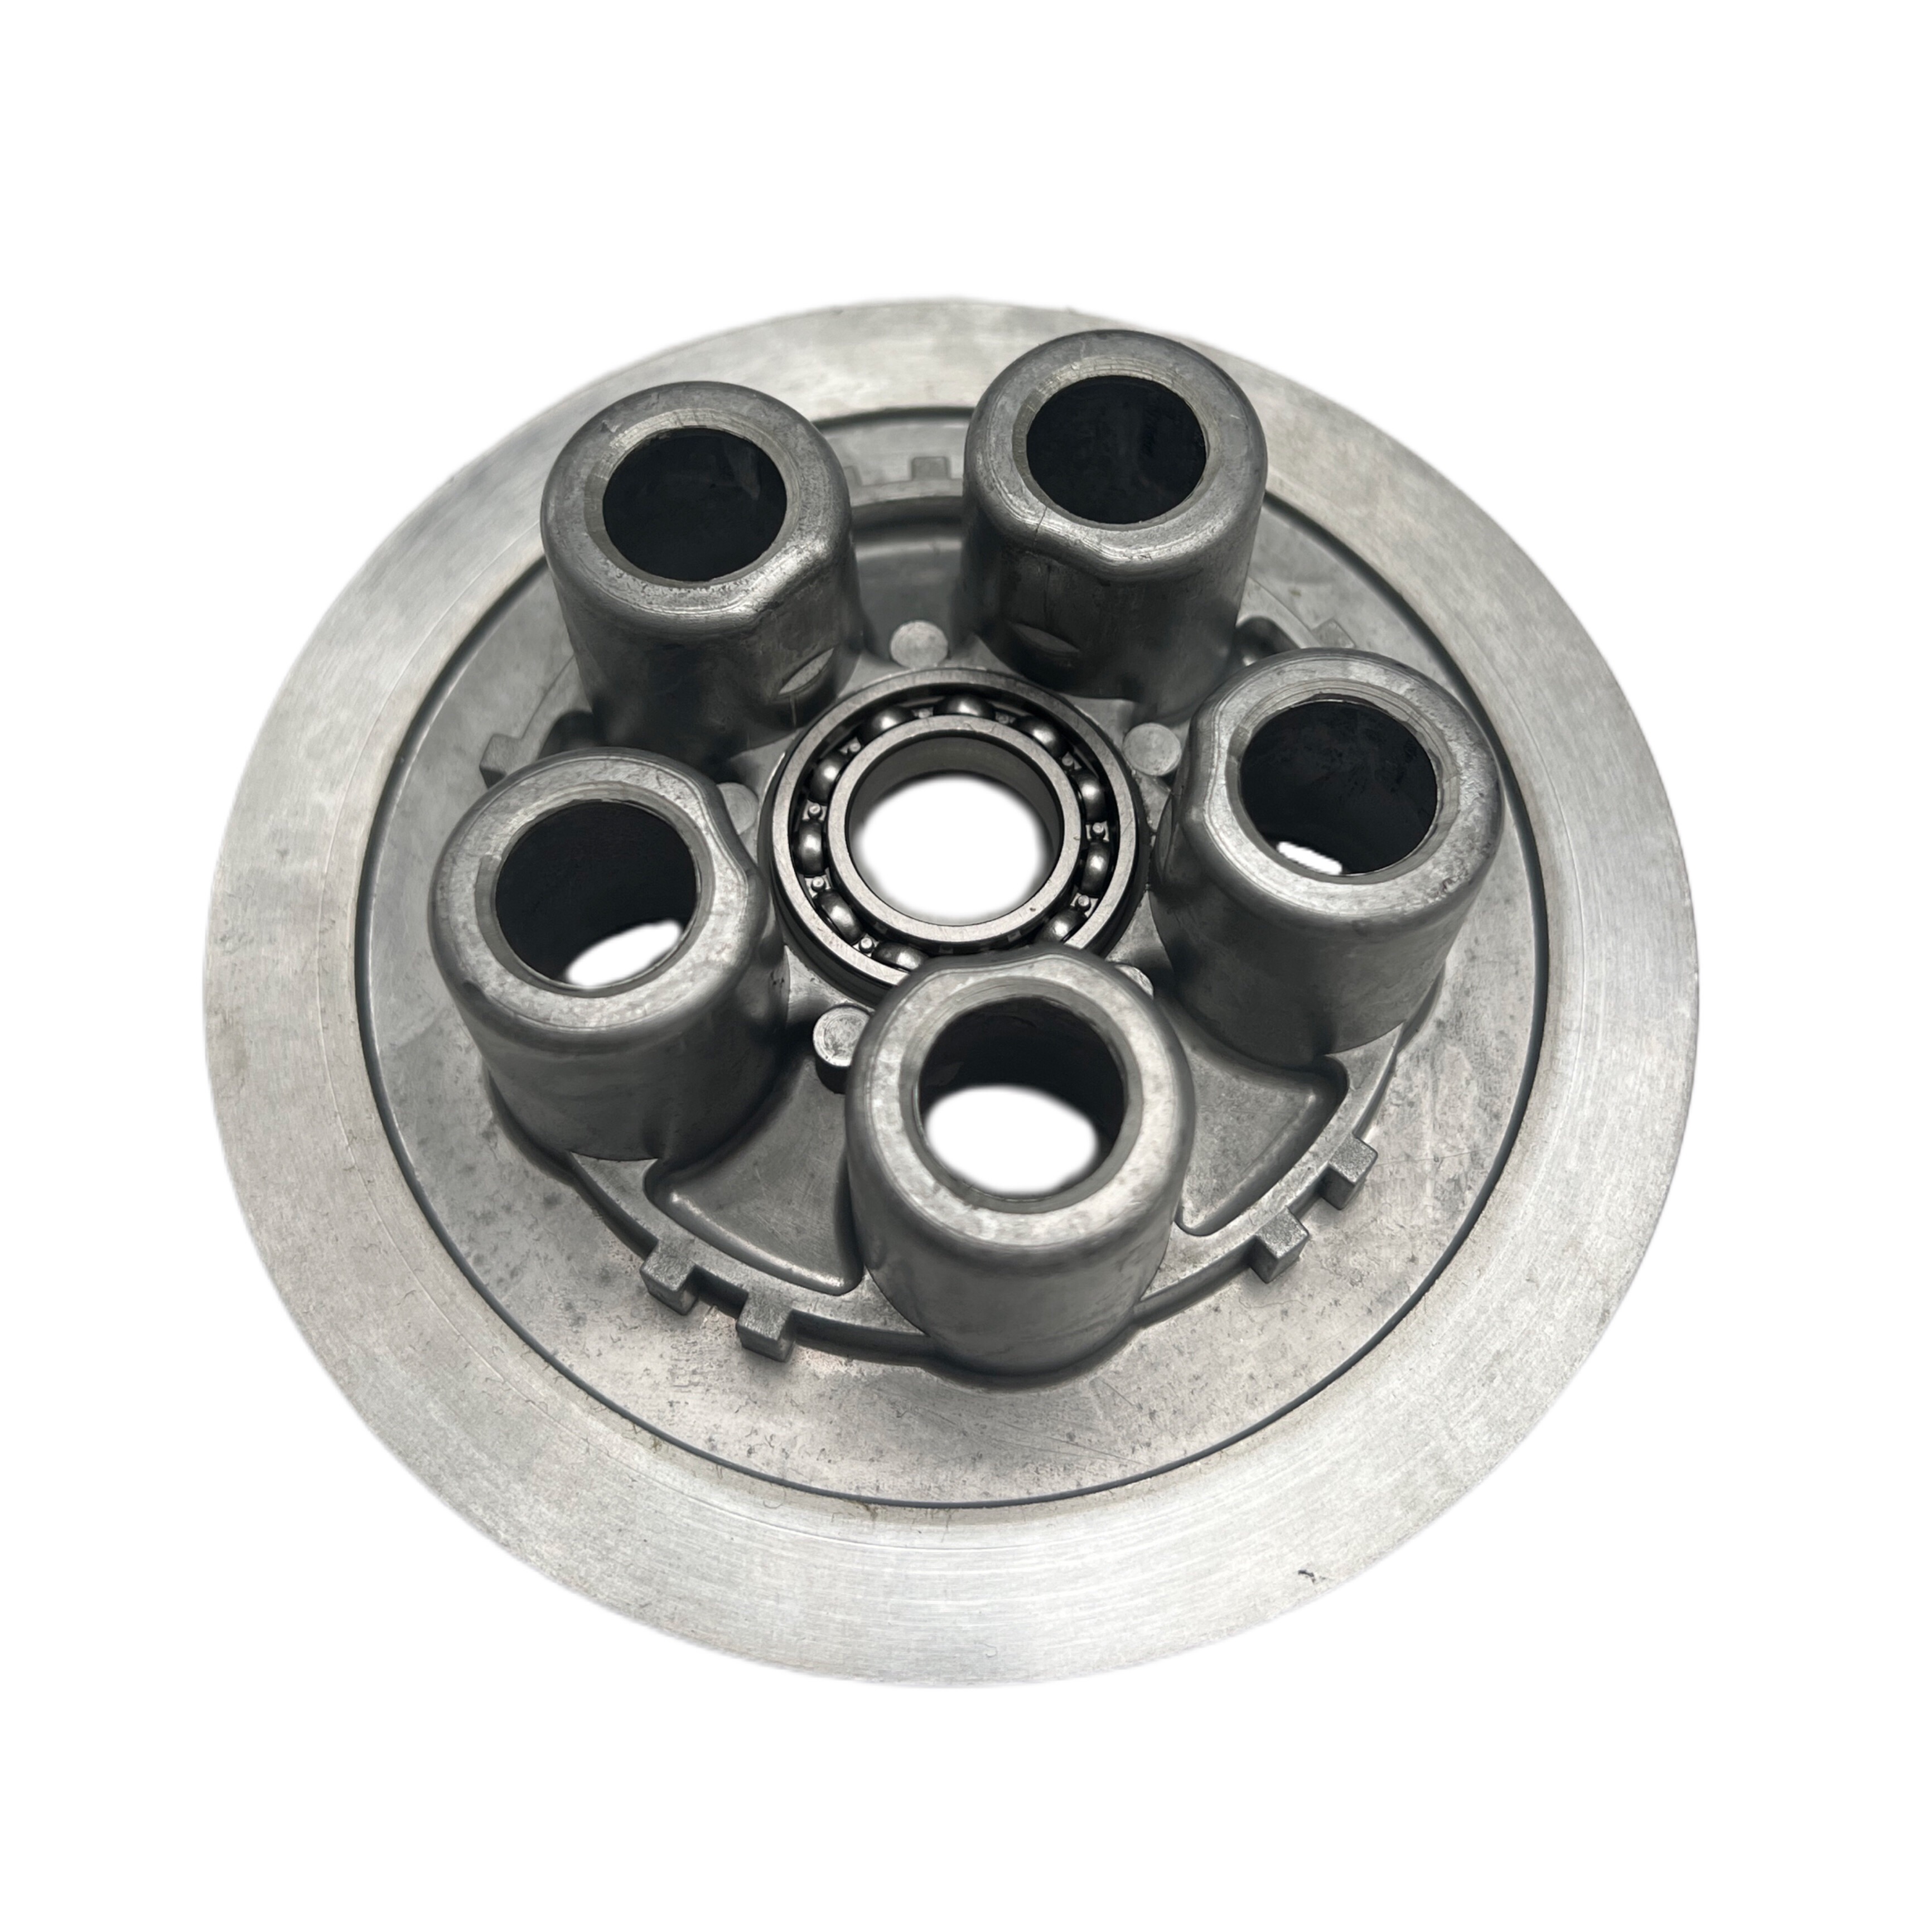 Clutch Drive Cover with Bearing